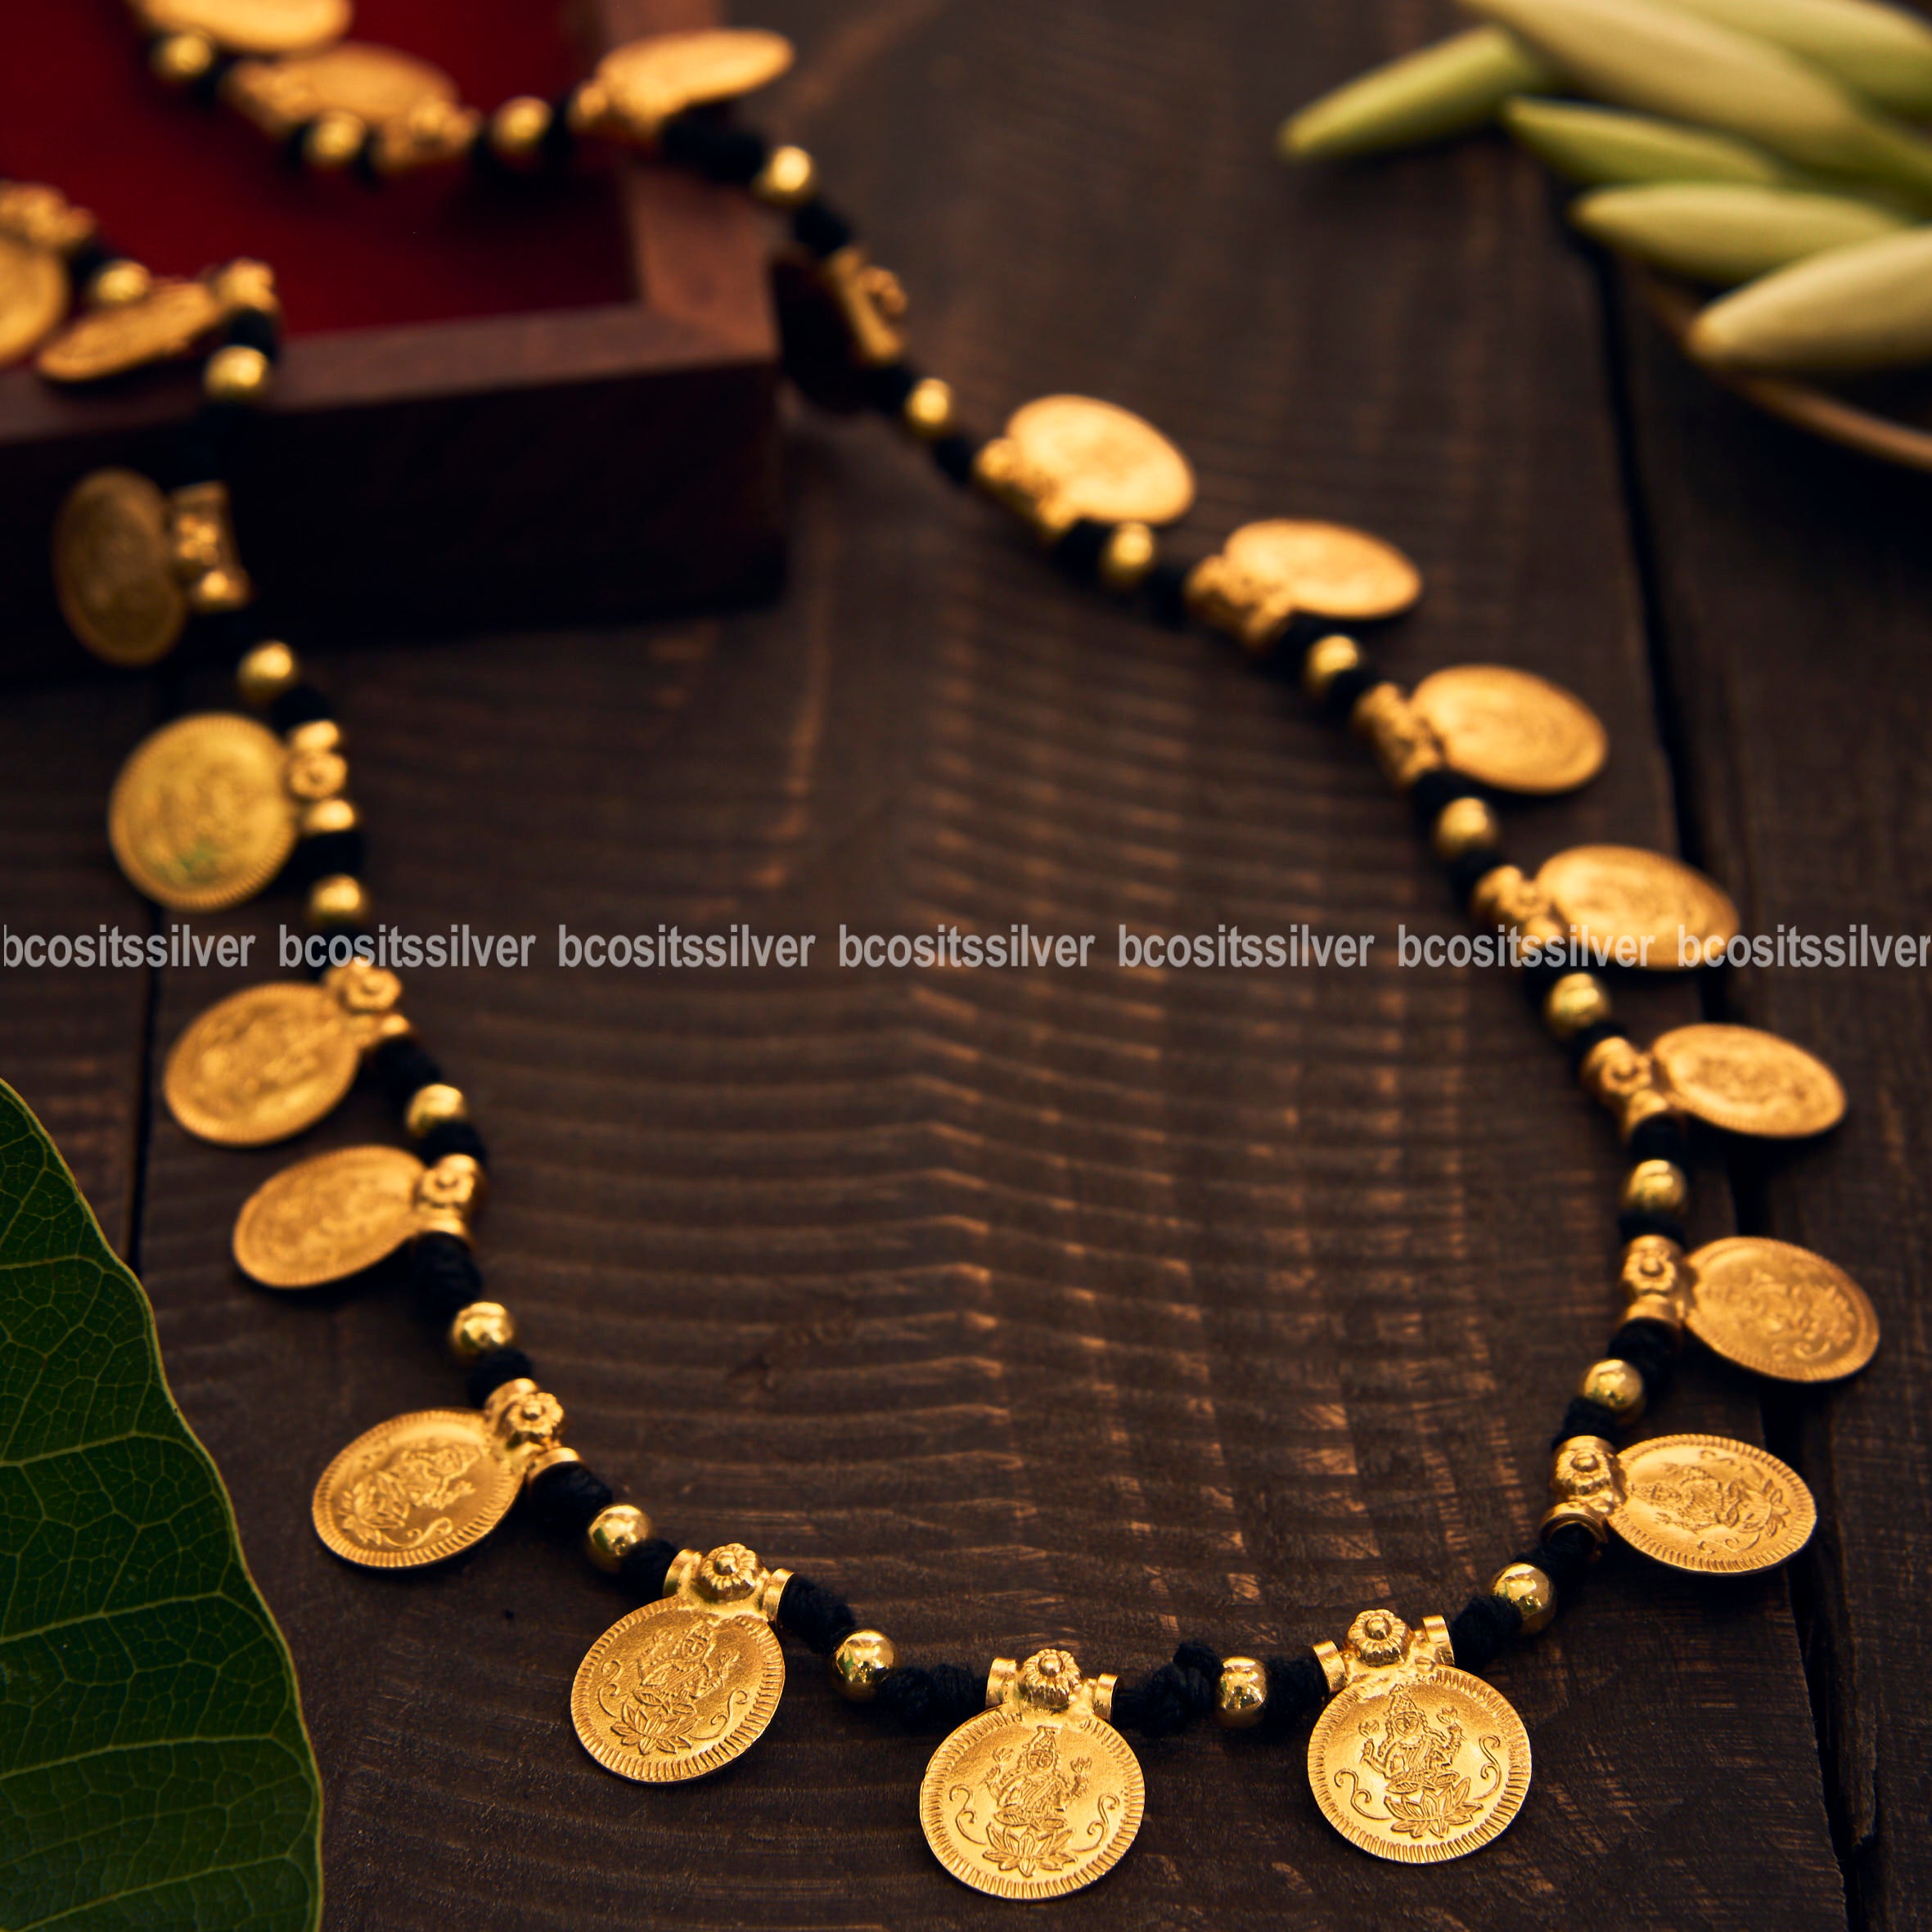 GOLD PLATED COIN LAKSHMI THREAD NECKLACE - 1188 - MADE TO ORDER